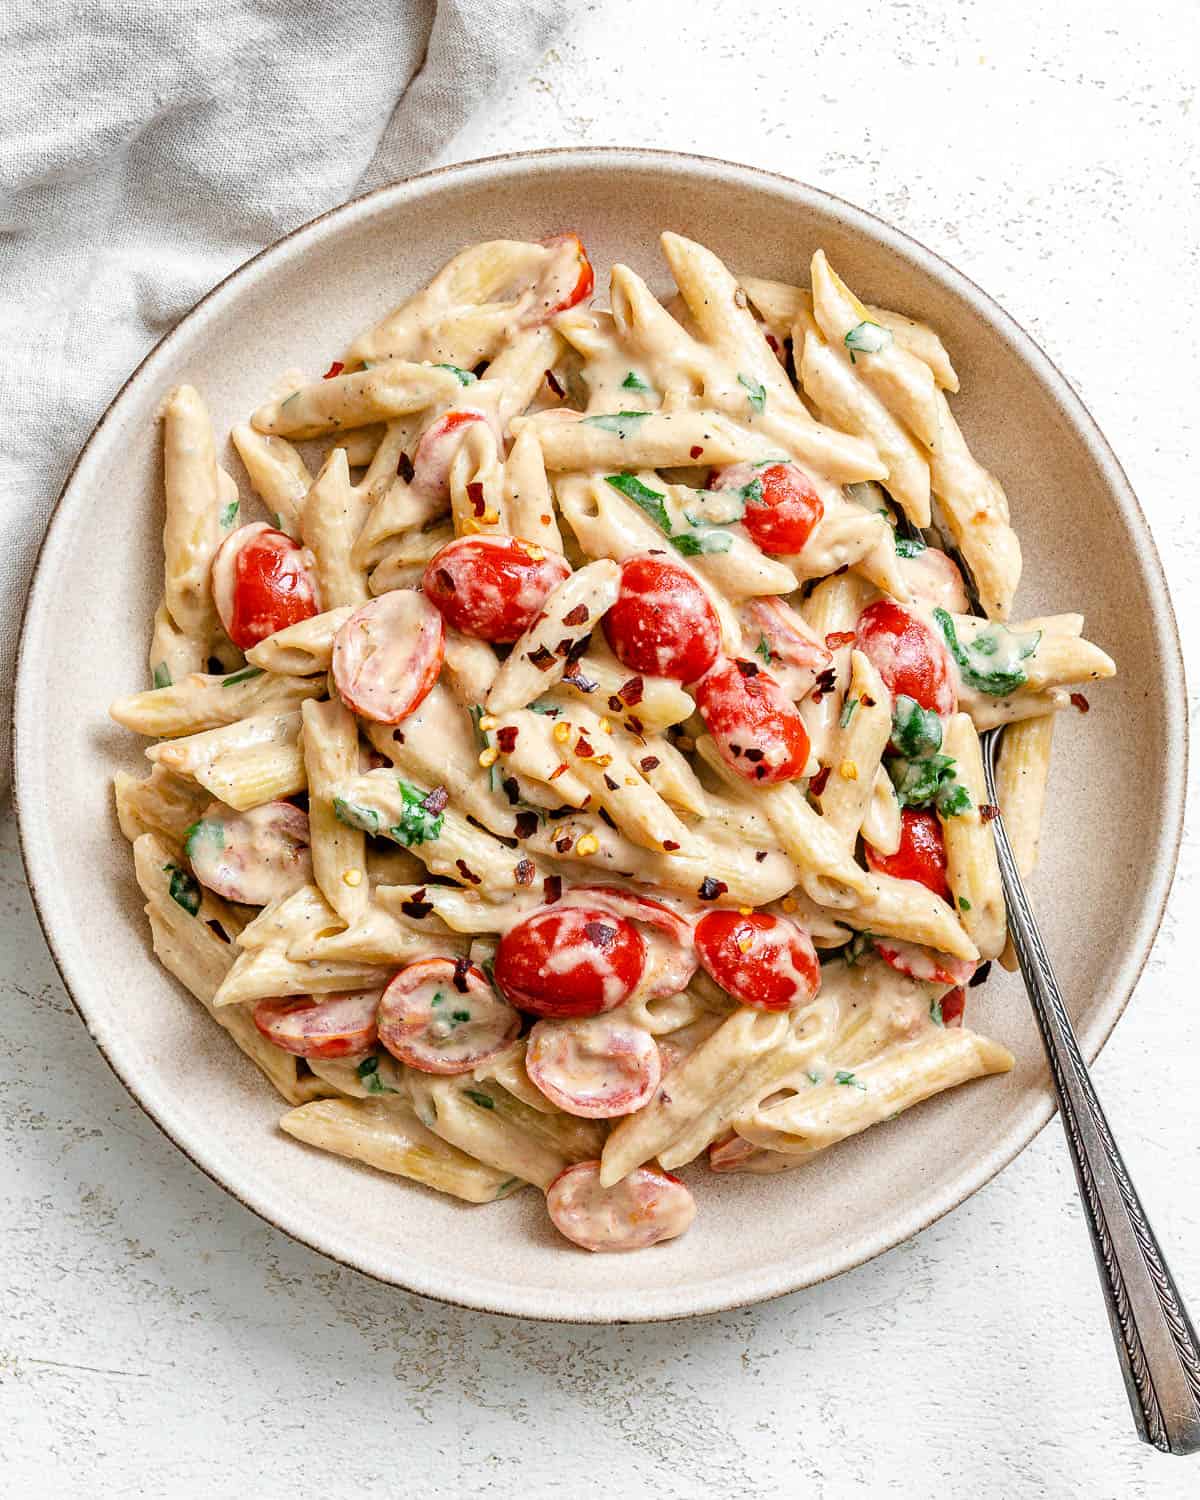 completed 20-Minute Creamy Tahini Pasta plated on a white plate against a light surface